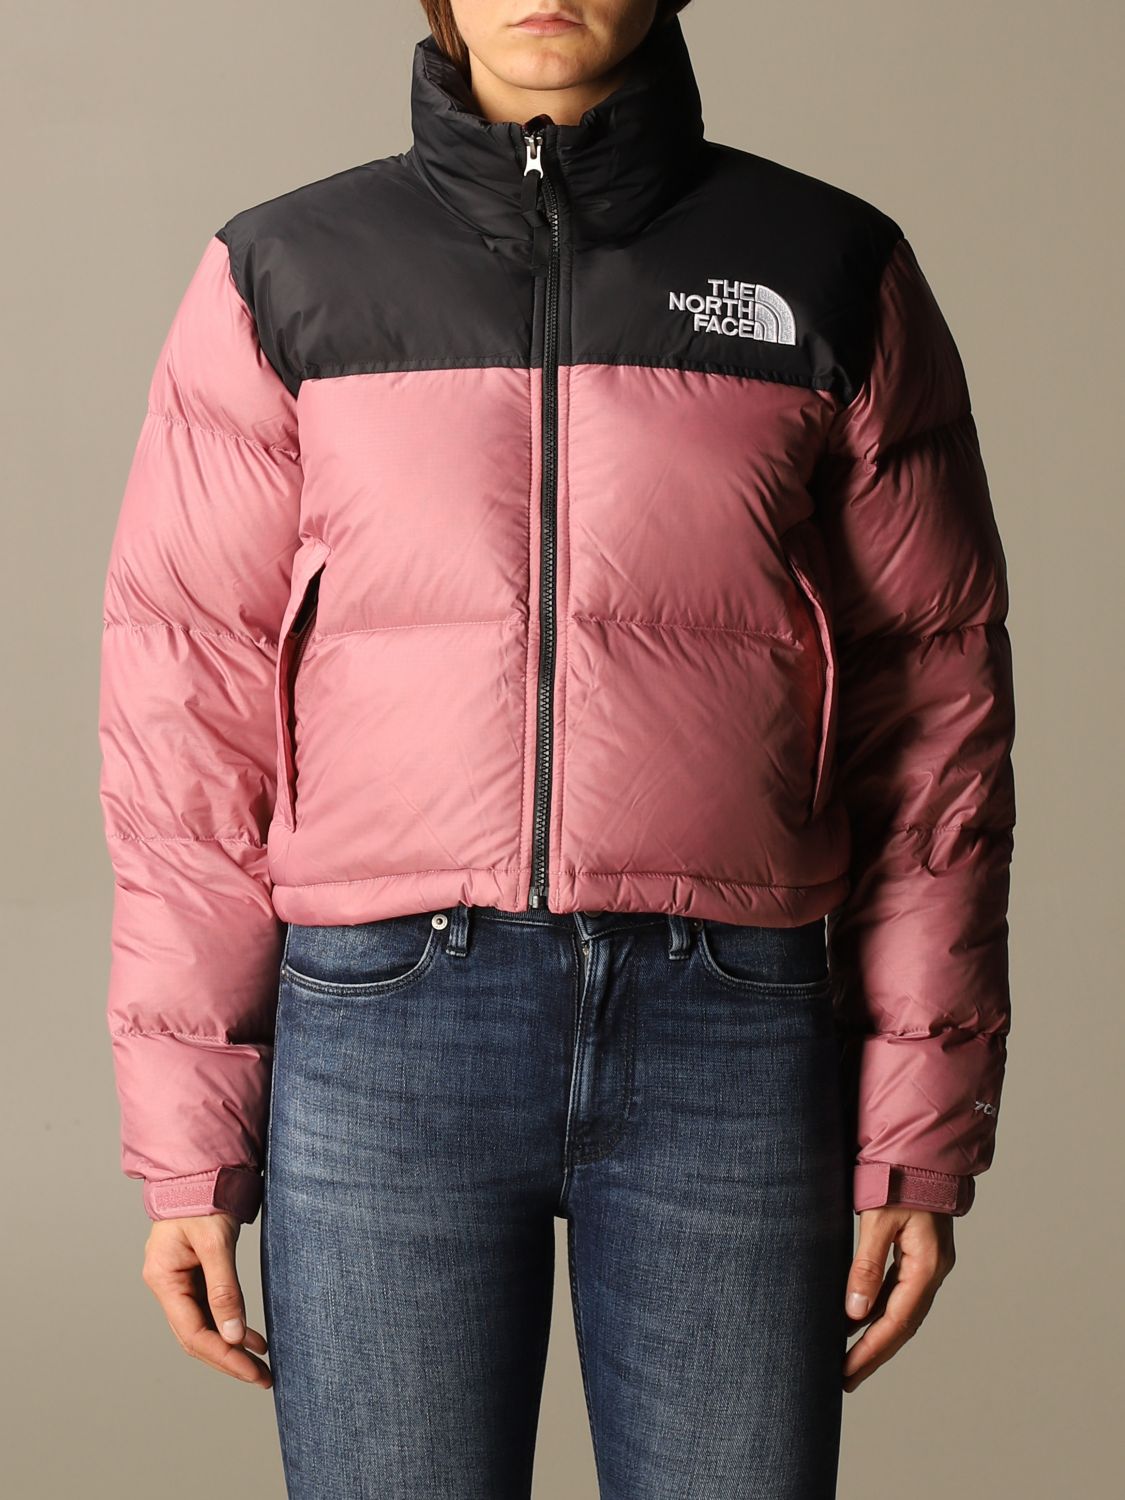 The North Face Cropped Down Jacket In Nylon Jacket The North Face Women Pink Jacket The North Face Nf0a3xe2 Giglio En